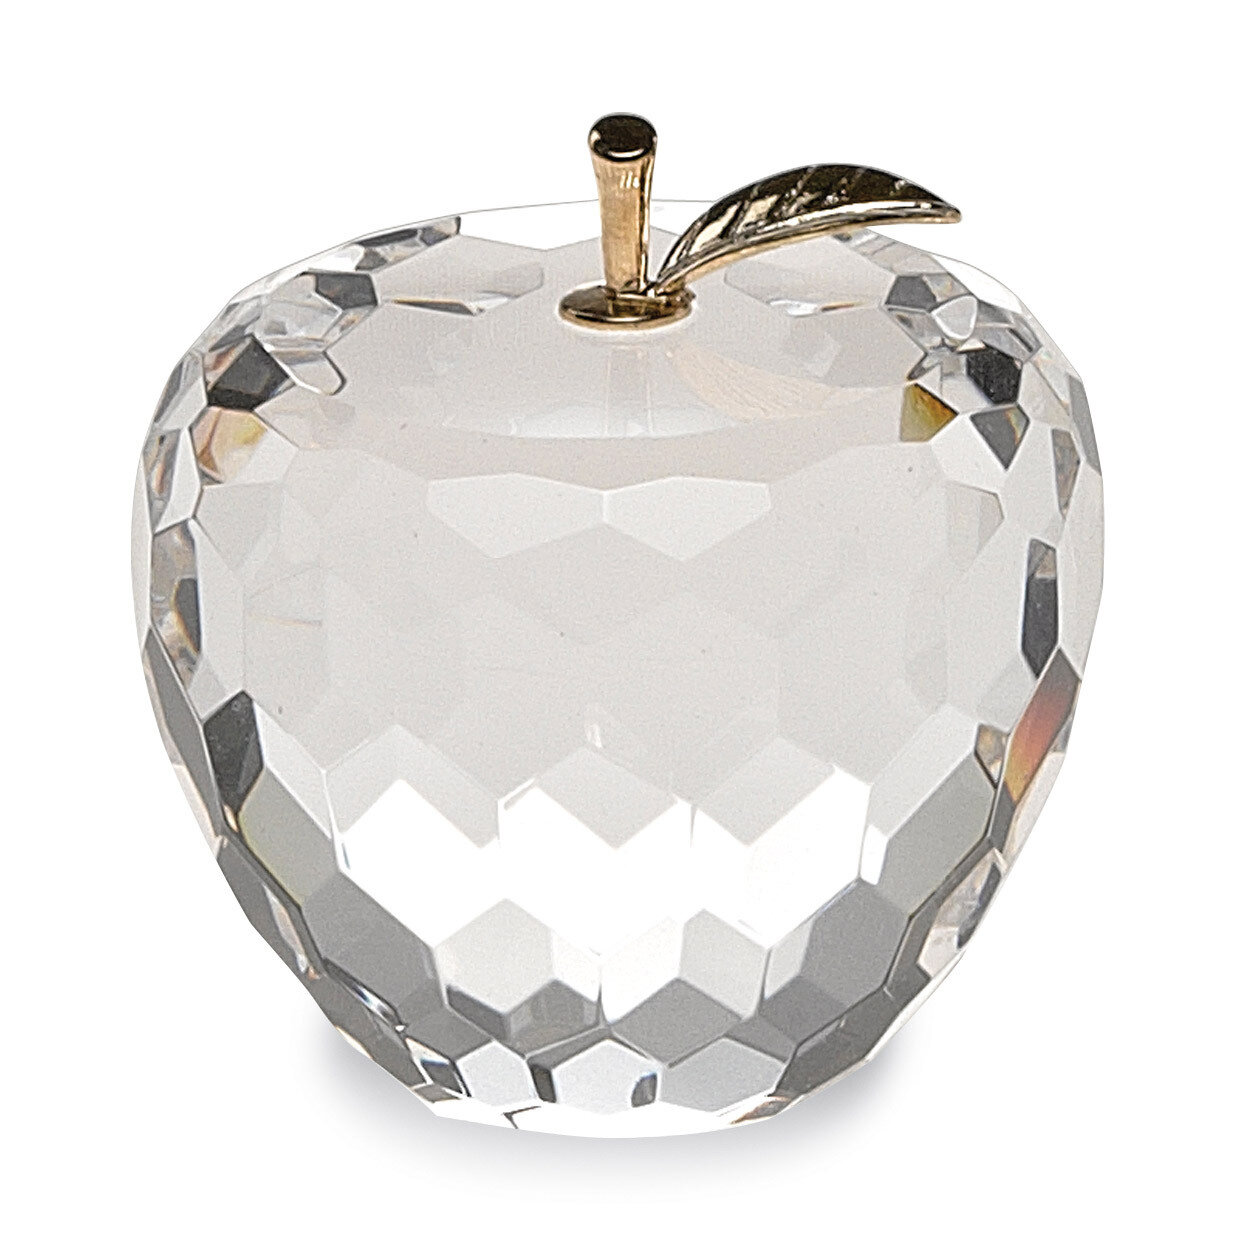 Badash Crystal Faceted Apple Paperweight with Golden Stem GM19724